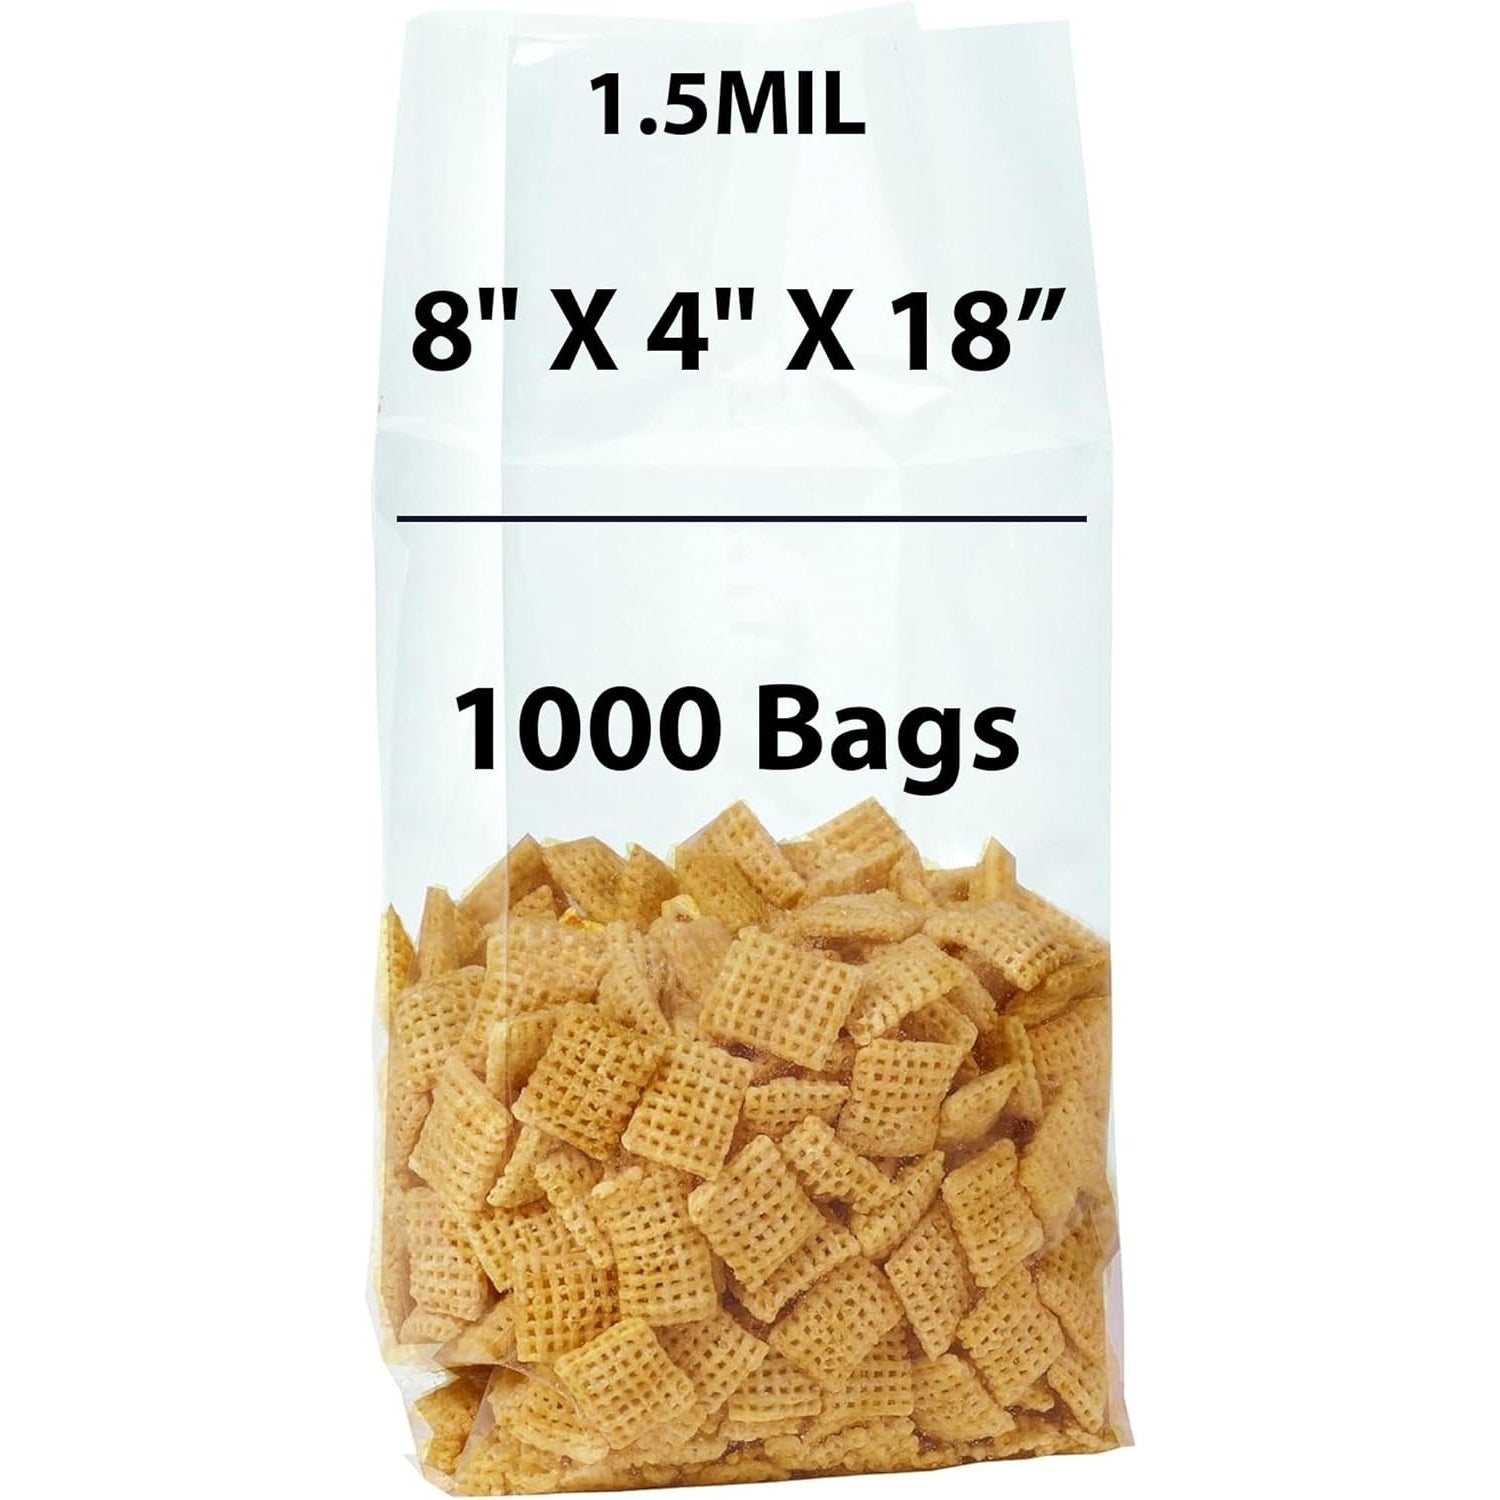 Gusseted Polypropylene Bags 1.5 Mil 8 inch X 4 inch X 18 inch Size Pack of 1000 Bags